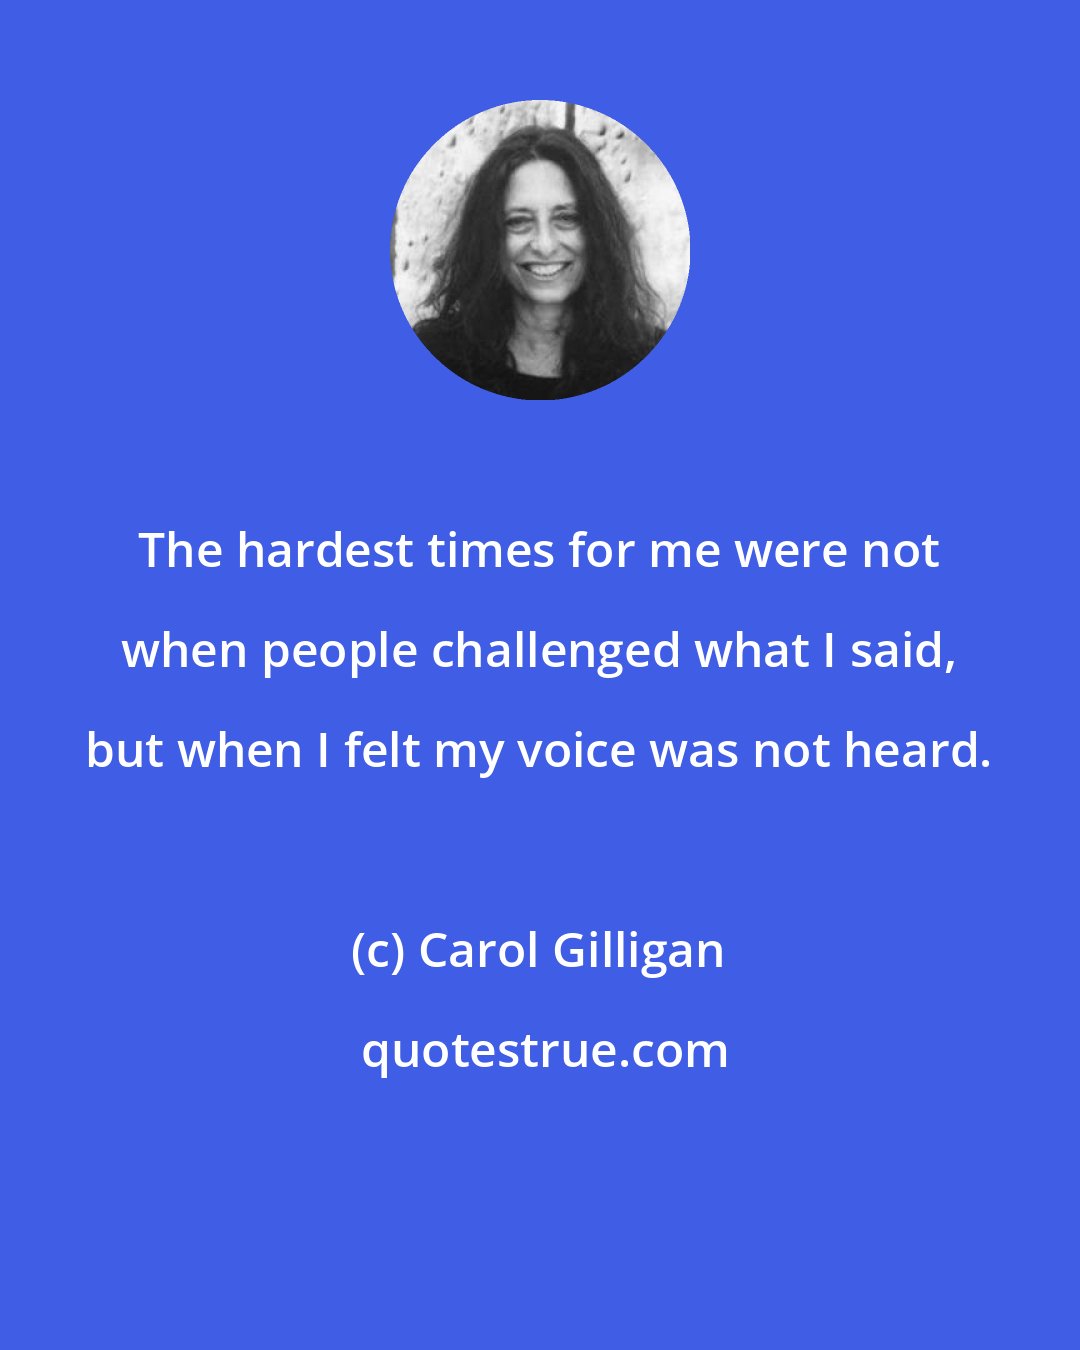 Carol Gilligan: The hardest times for me were not when people challenged what I said, but when I felt my voice was not heard.